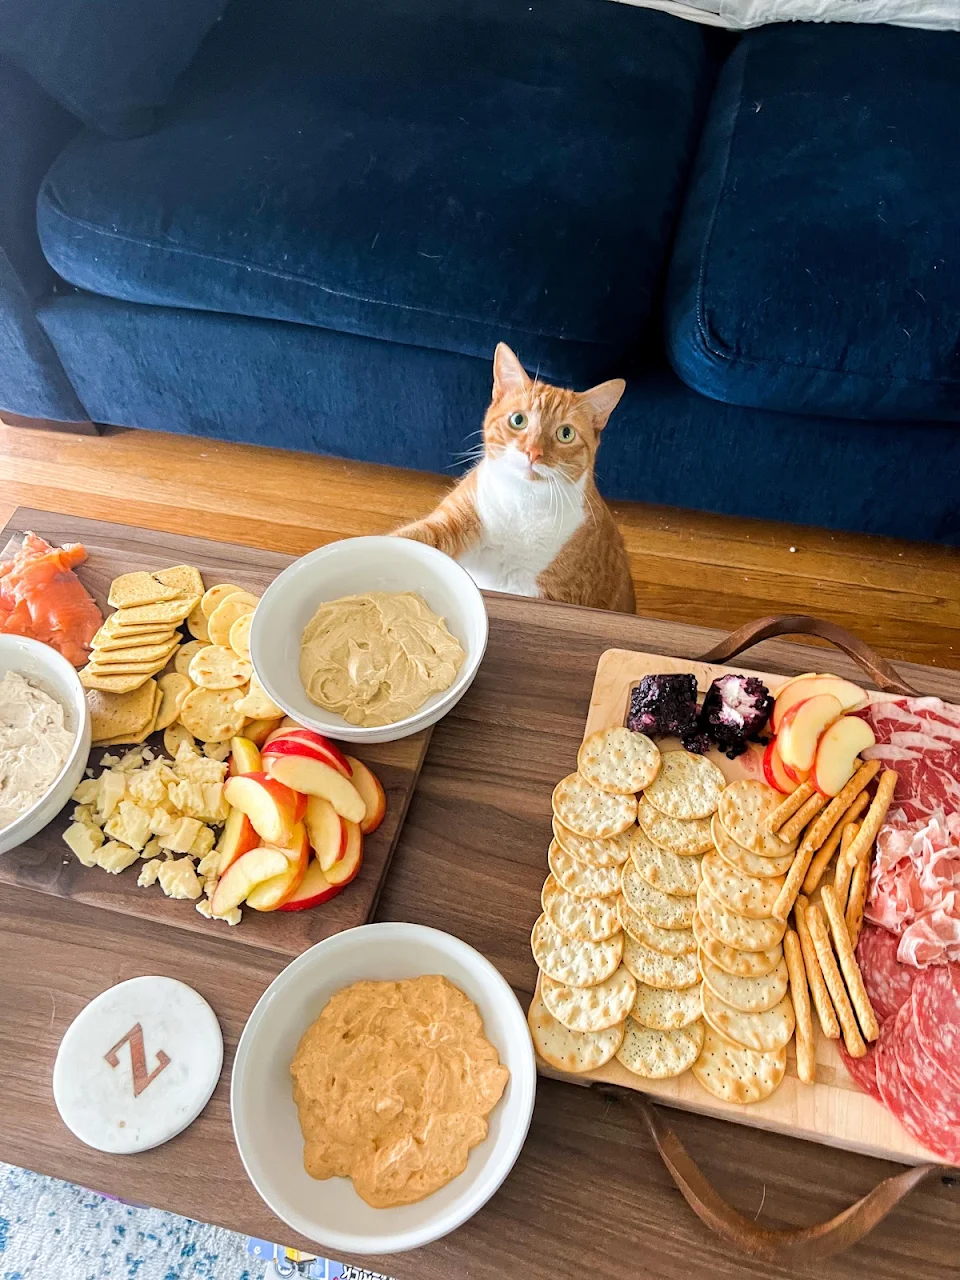 Nugget prepared some charcuterie for us today